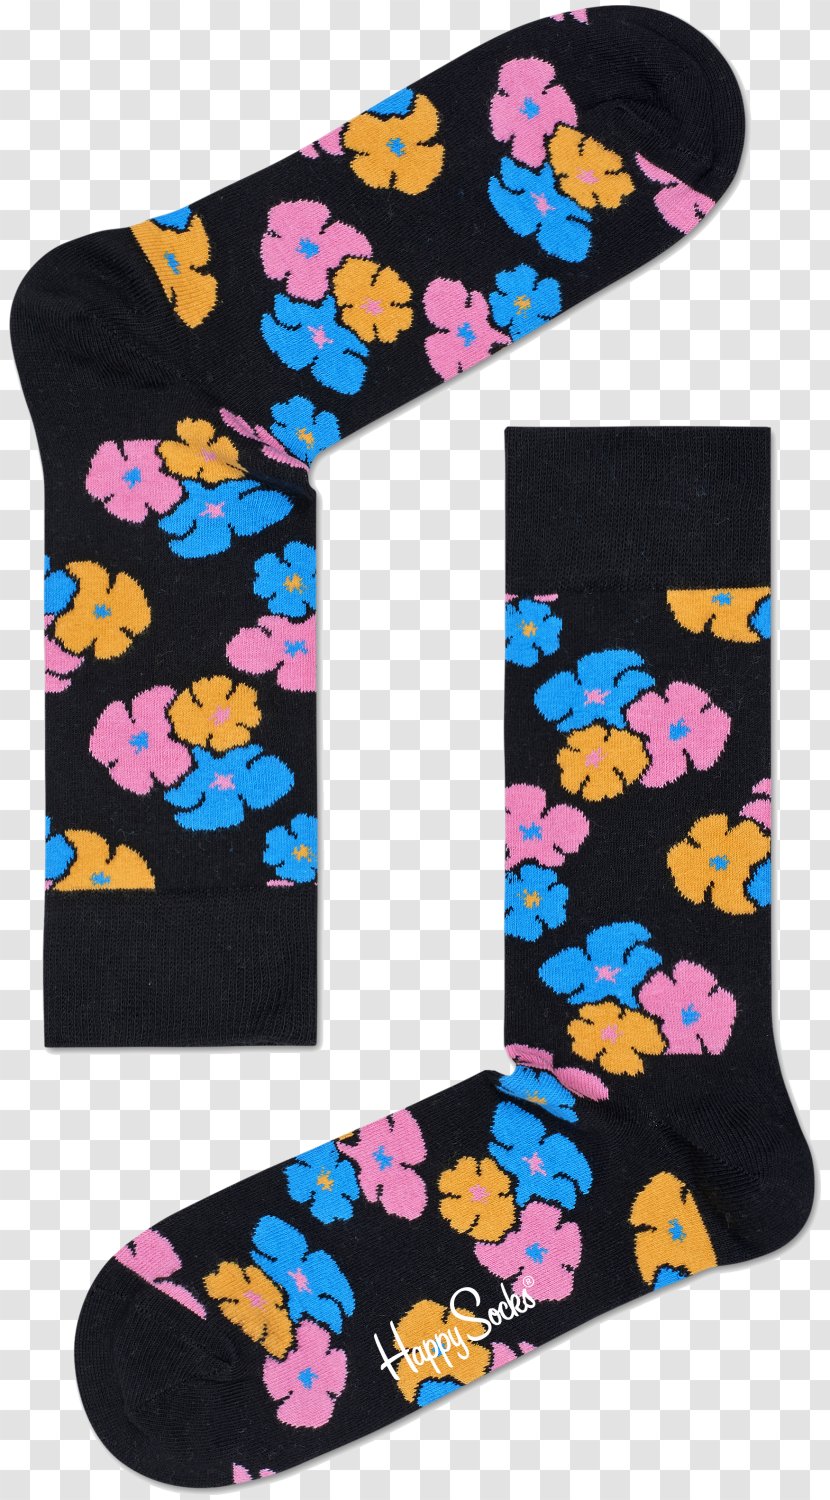 Sock Amazon.com Clothing Accessories Shoelaces - Baby Socks Transparent PNG